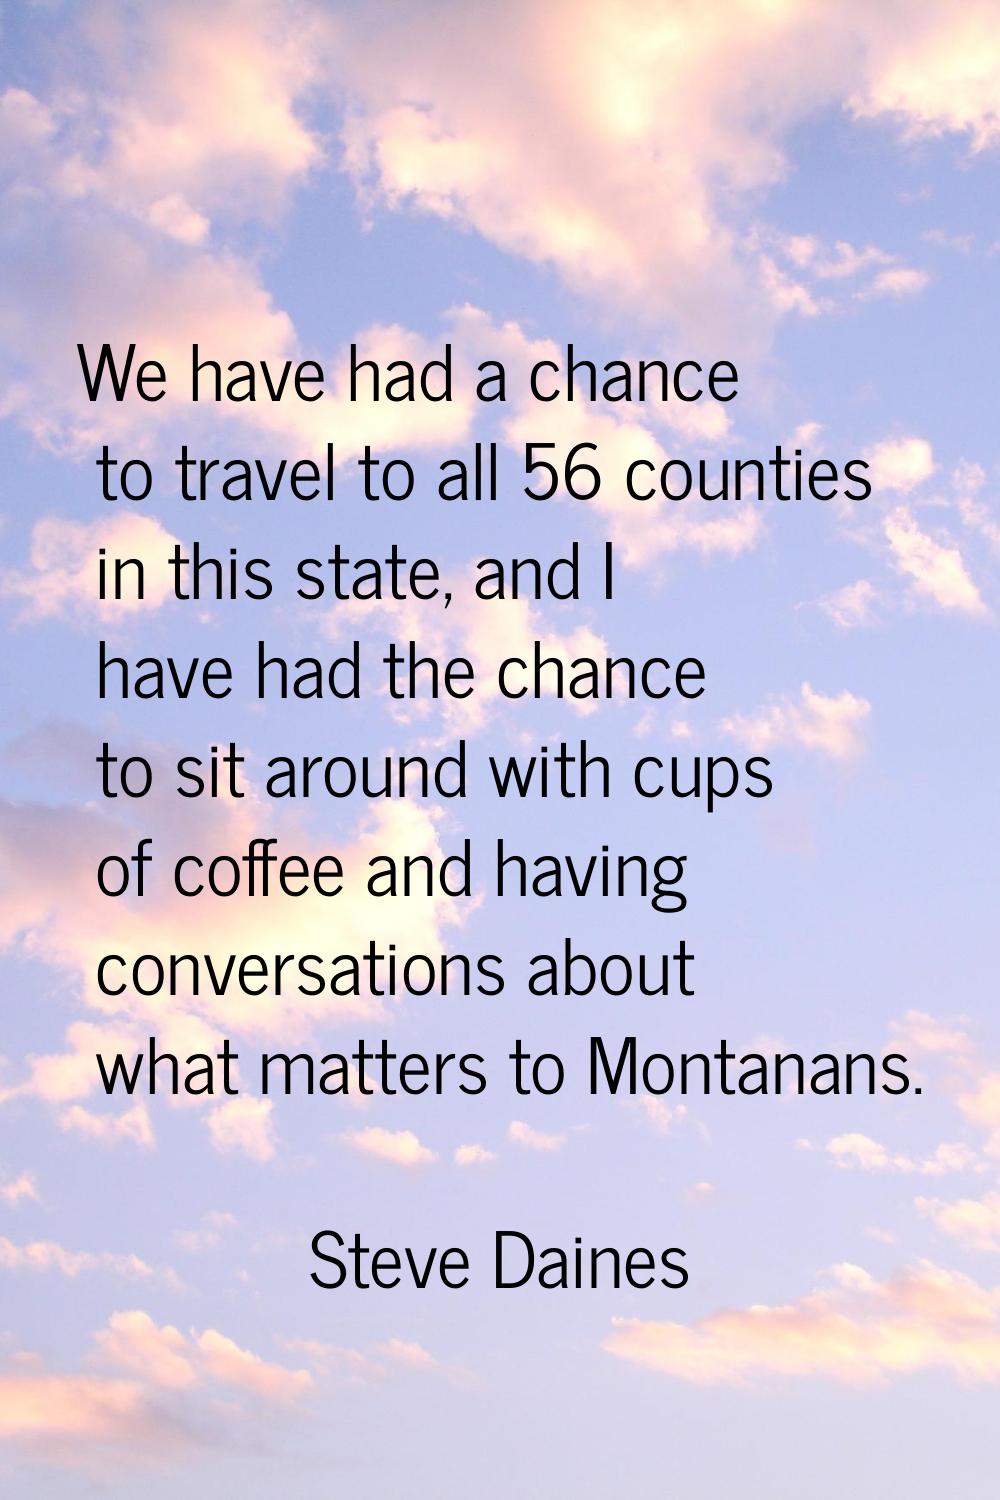 We have had a chance to travel to all 56 counties in this state, and I have had the chance to sit a